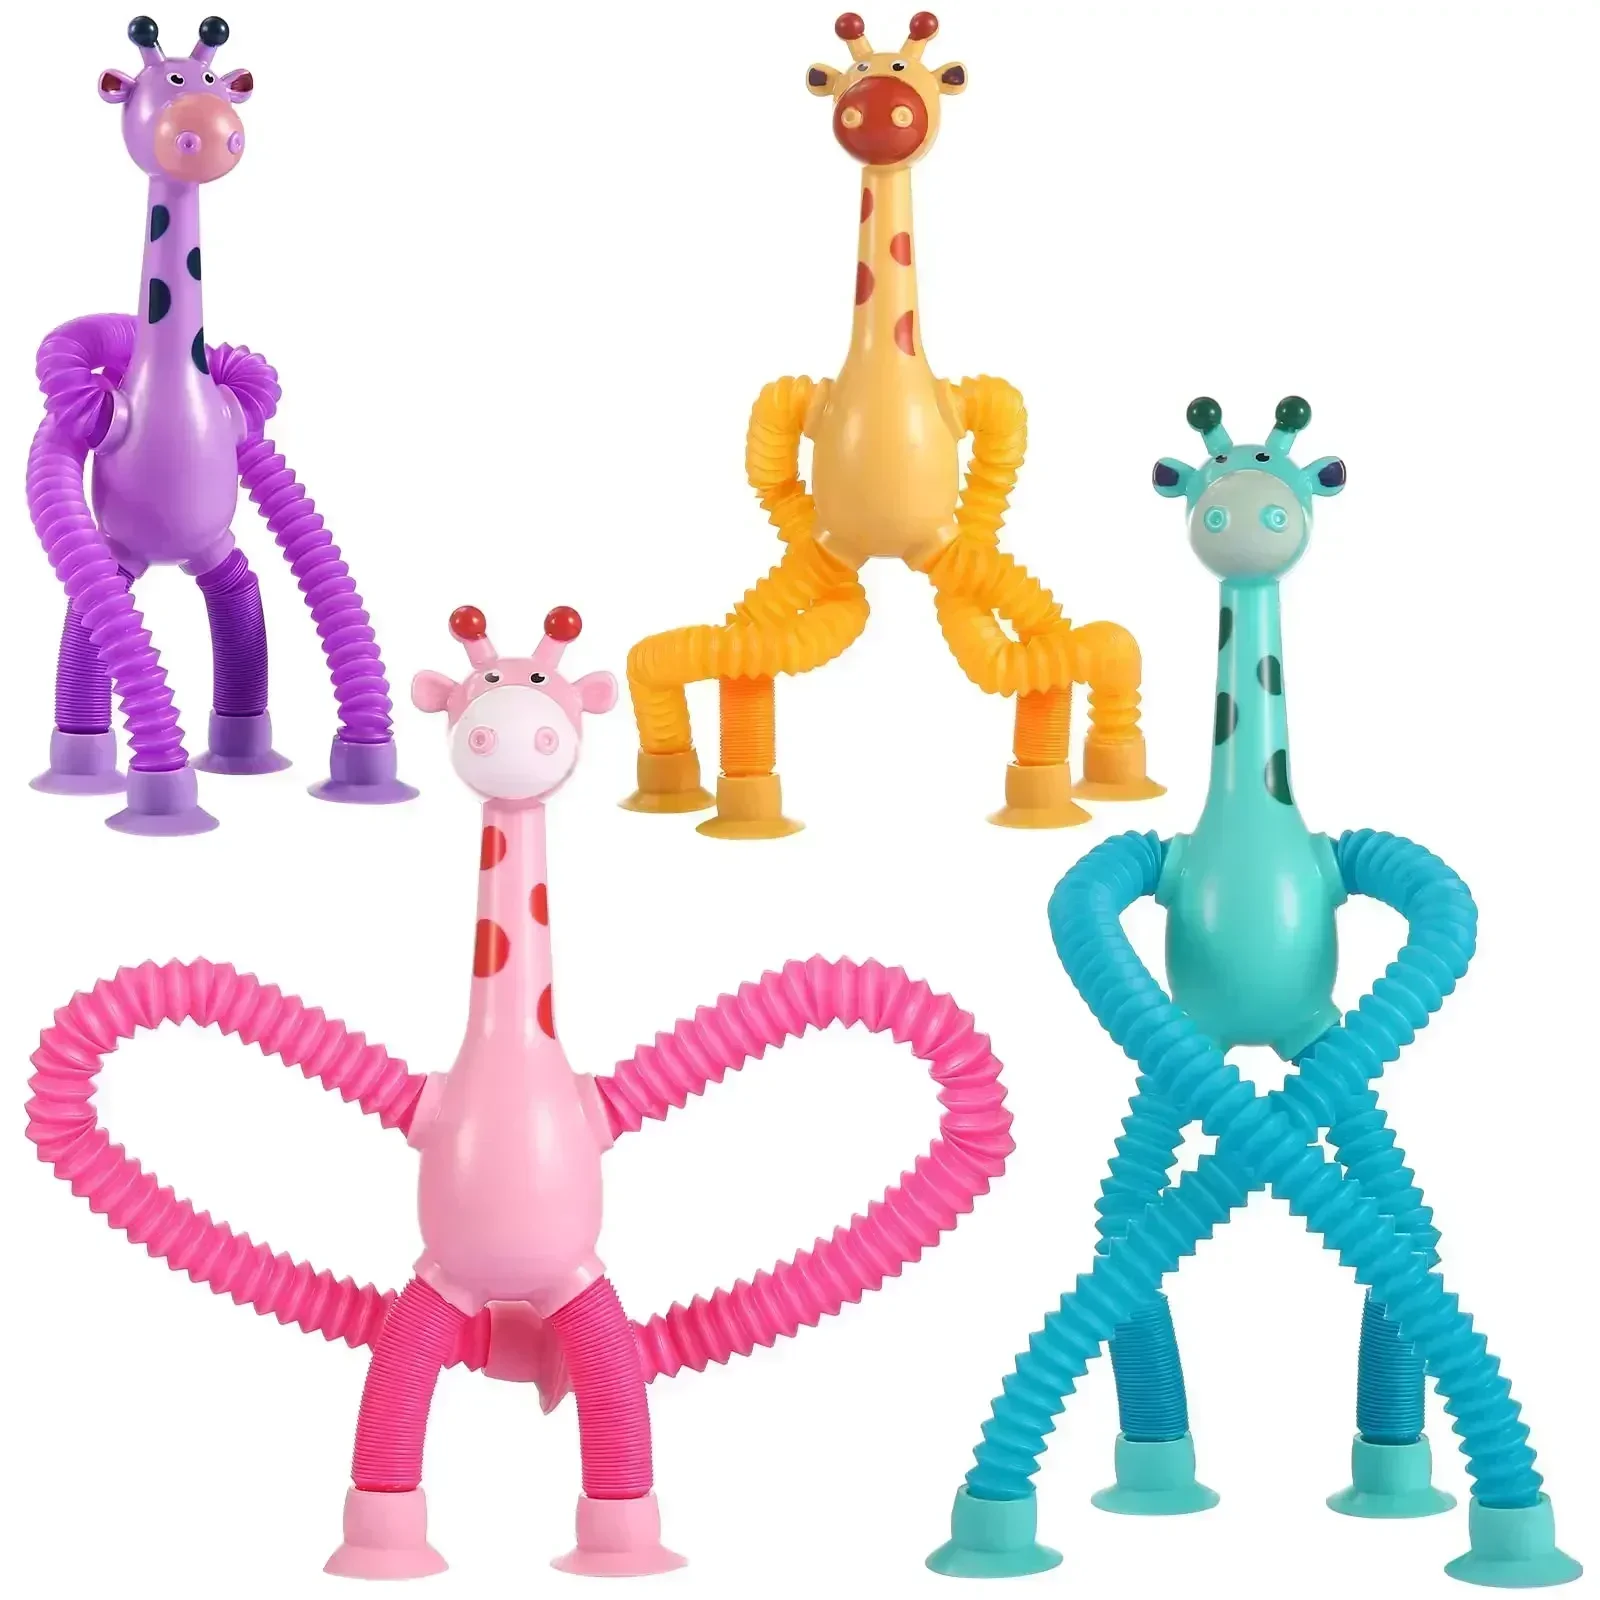 

Children Suction Cup Toys Pop Tubes Stress Relief Telescopic Giraffe Hand Toys Sensory Bellows Toys Anti-stress Squeeze Toy Gift